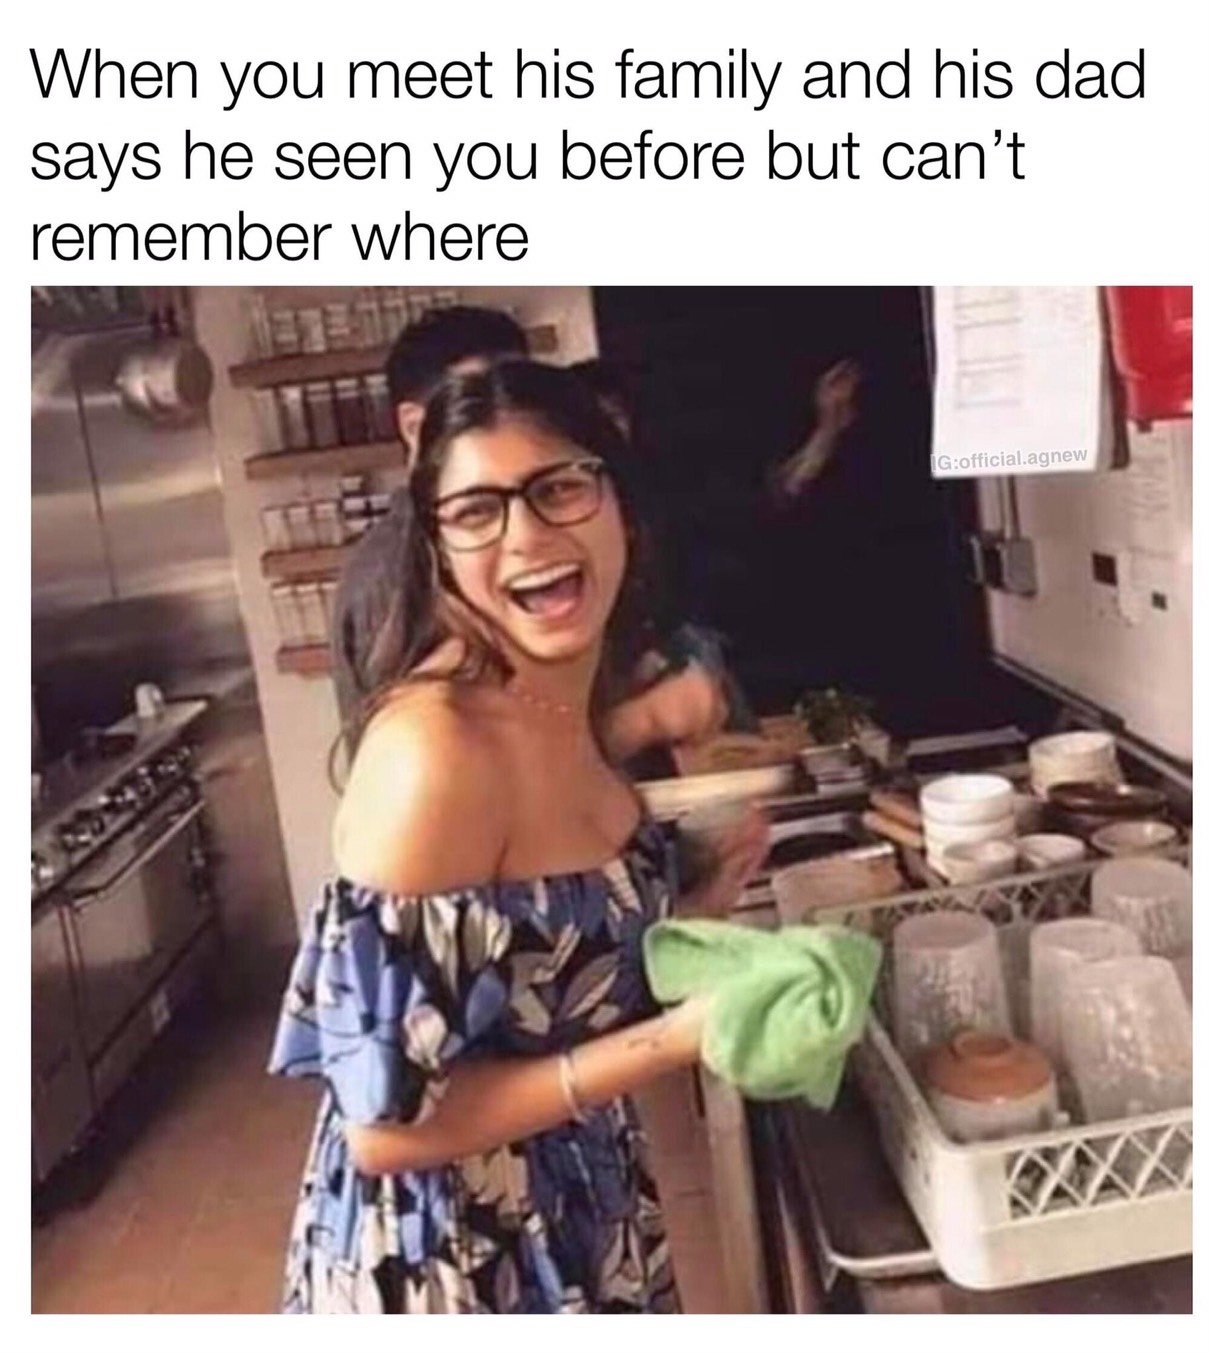 she's a keeper meme - When you meet his family and his dad says he seen you before but can't remember where Igofficial.agnew